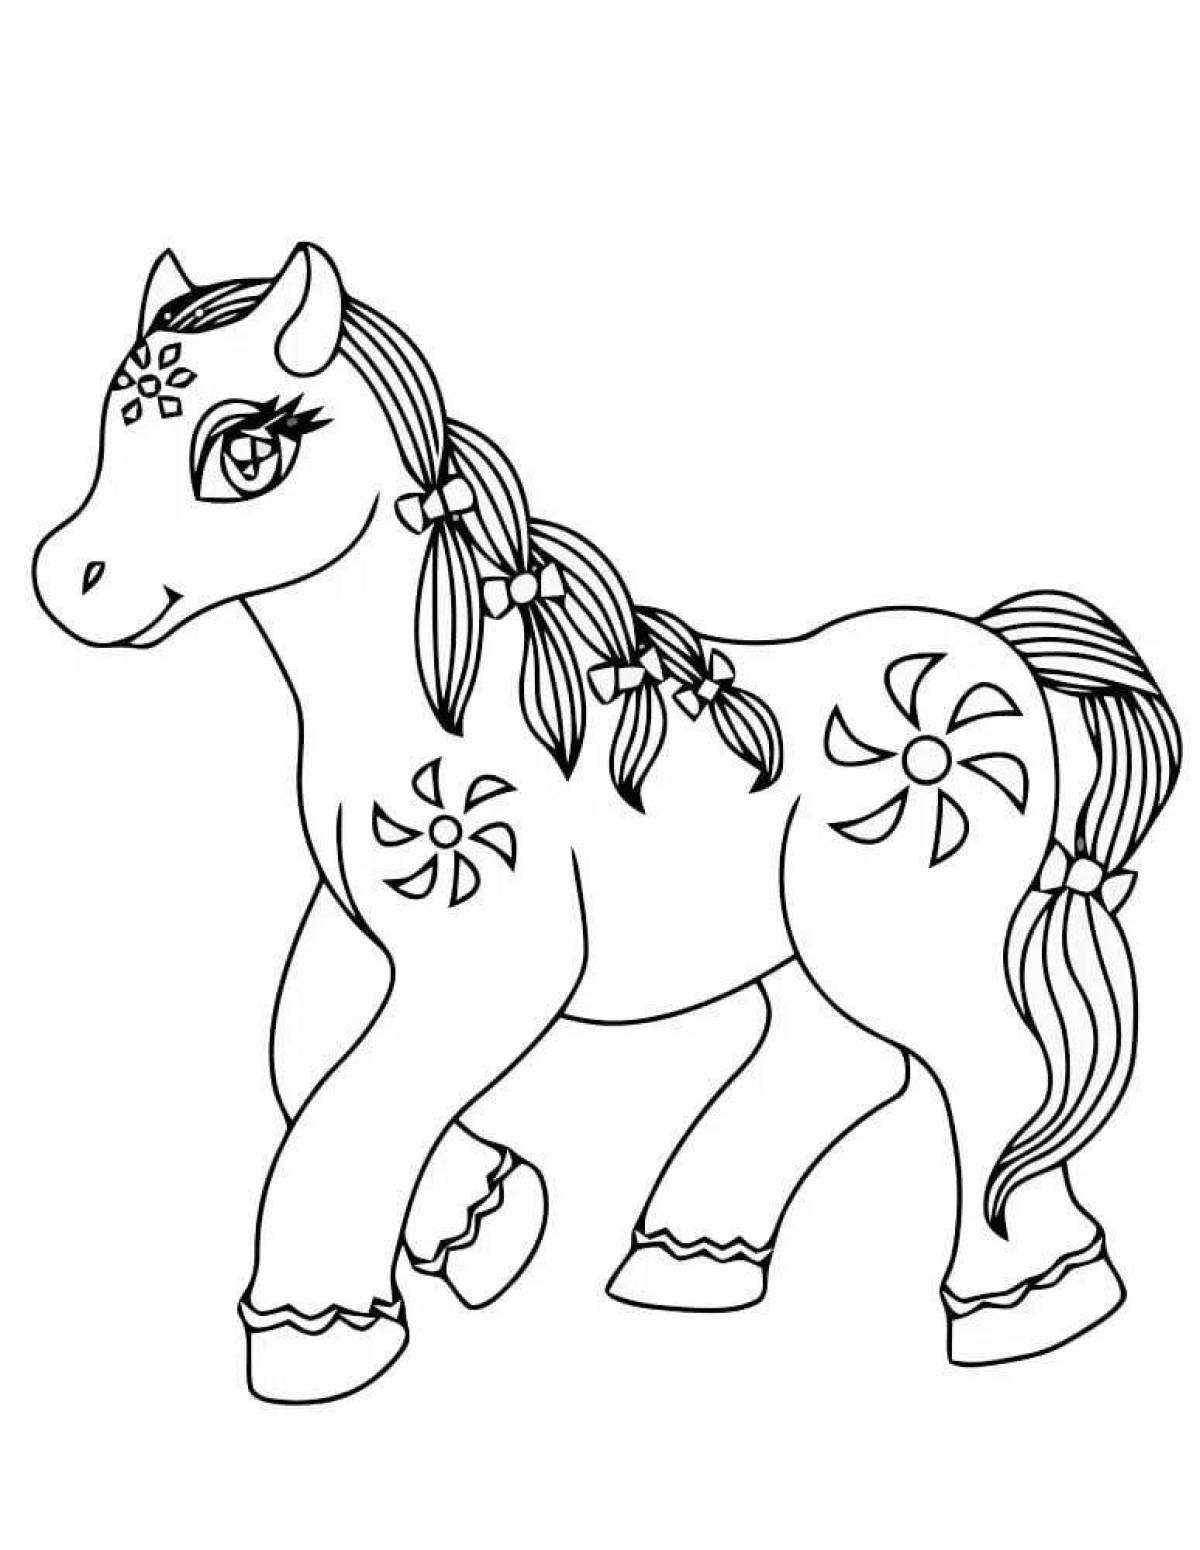 Playful brown horse coloring book for kids